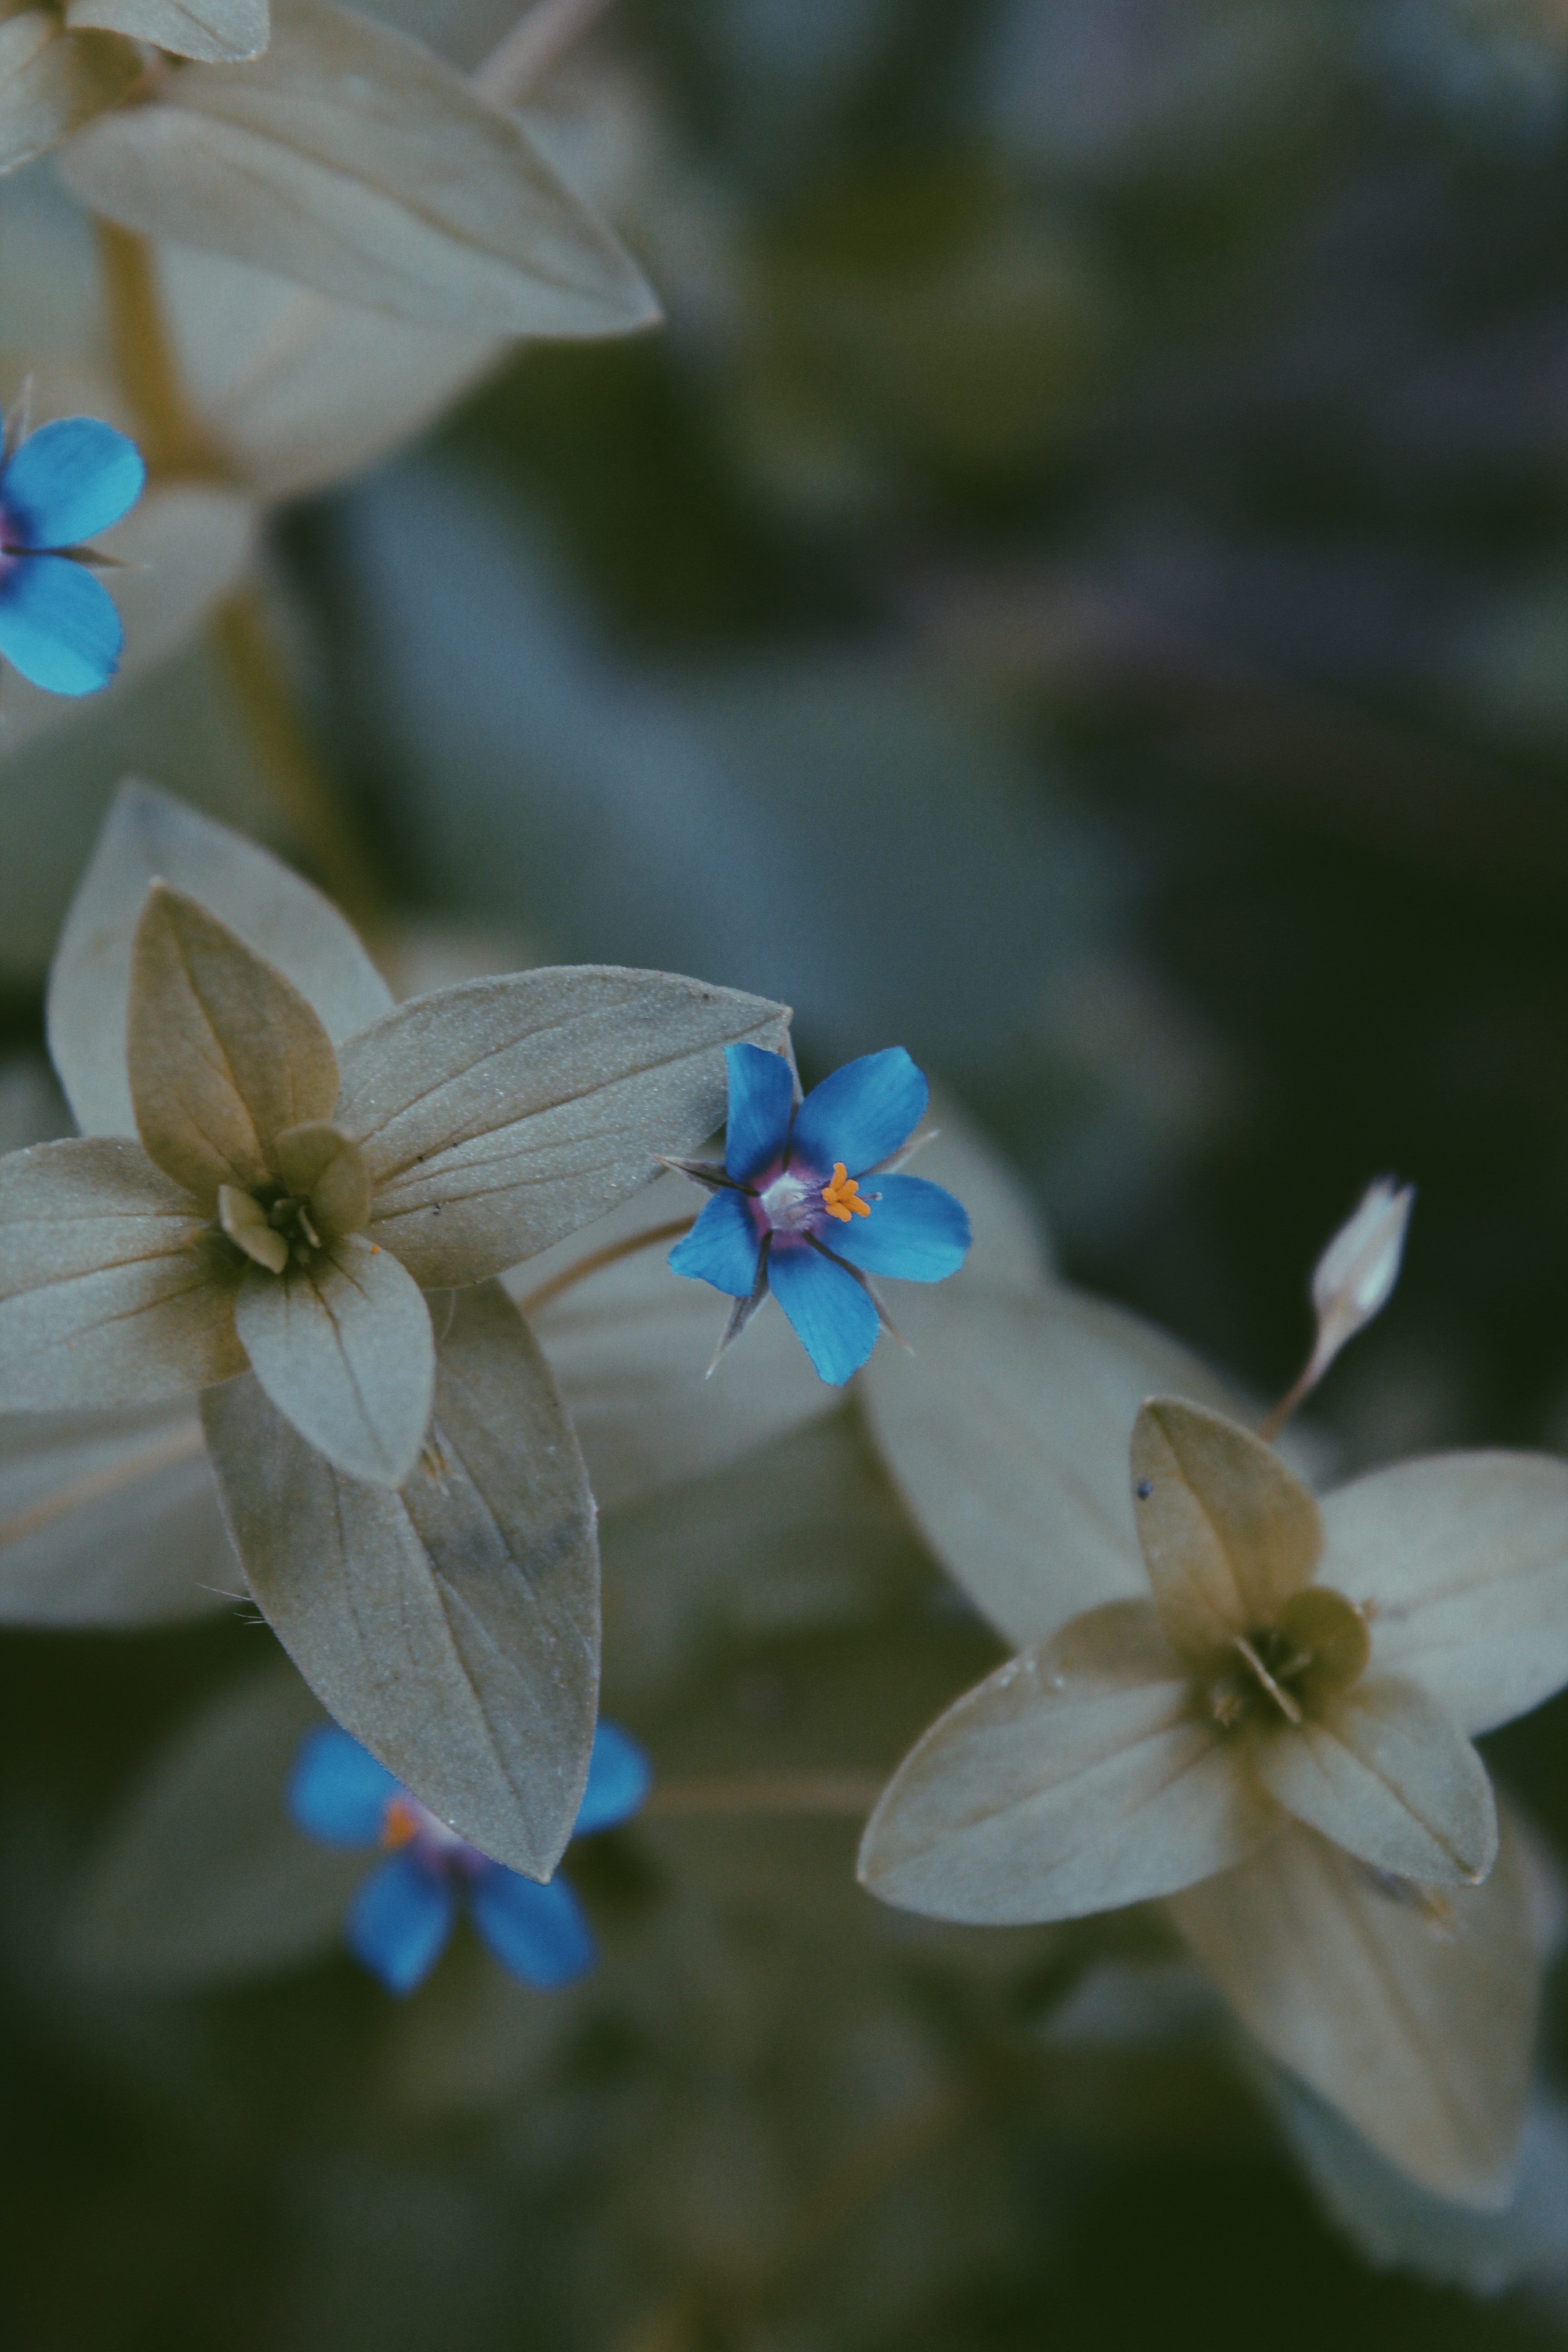 98469 download wallpaper leaves, green, blue, flower, macro, blur, smooth, flora screensavers and pictures for free